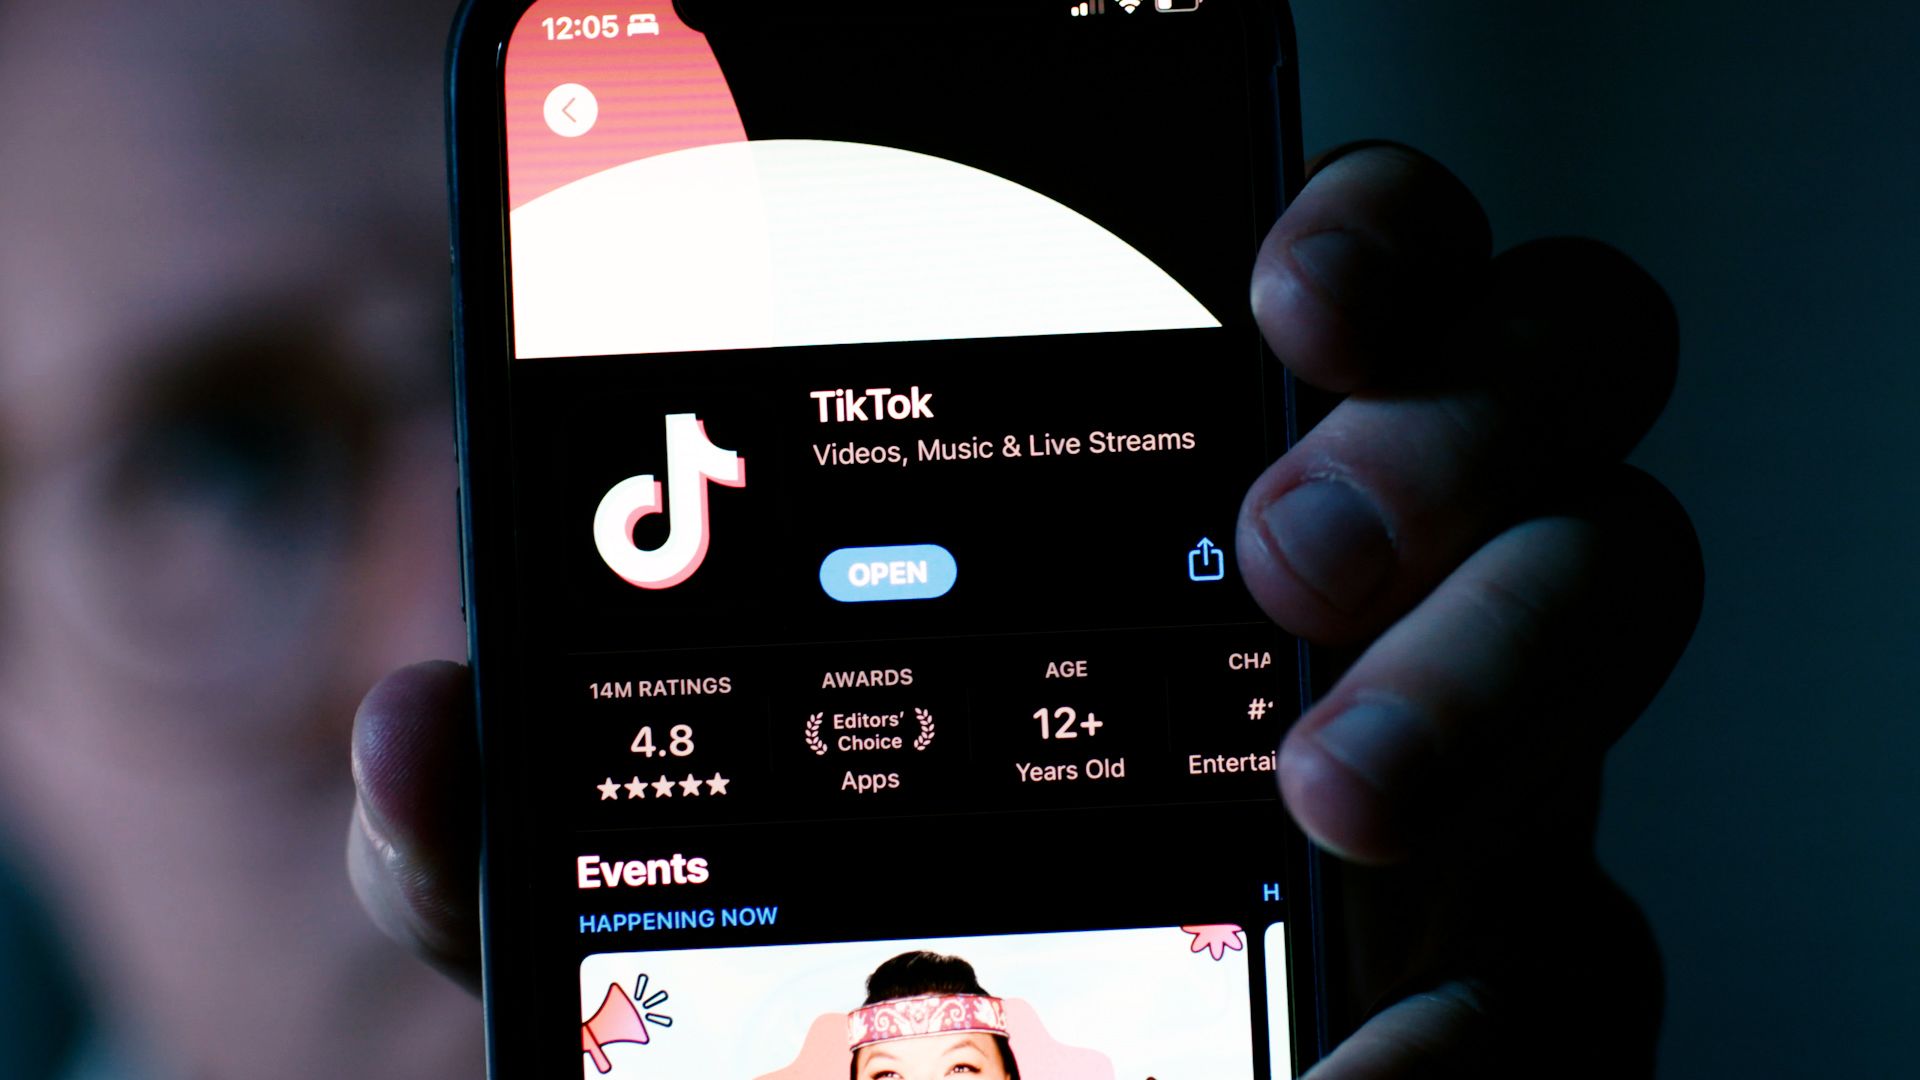 China's TikTok denies report of delay in launch of US shopping